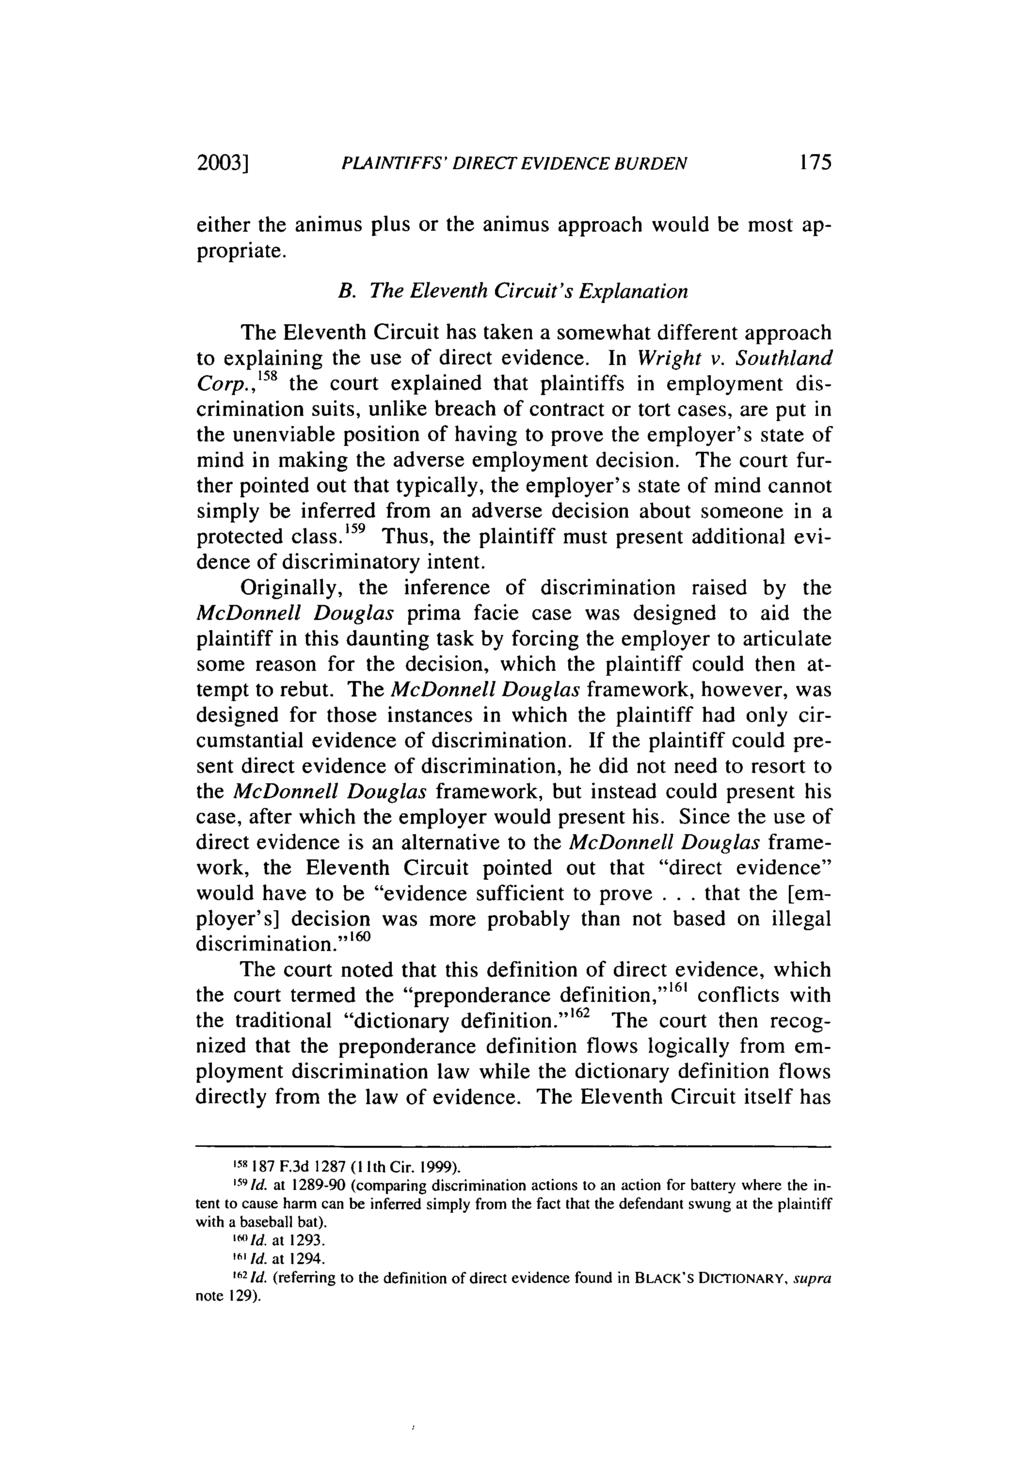 2003] PLAINTIFFS' DIRECT EVIDENCE BURDEN either the animus plus or the animus approach would be most appropriate. B. The Eleventh Circuit's Explanation The Eleventh Circuit has taken a somewhat different approach to explaining the use of direct evidence.